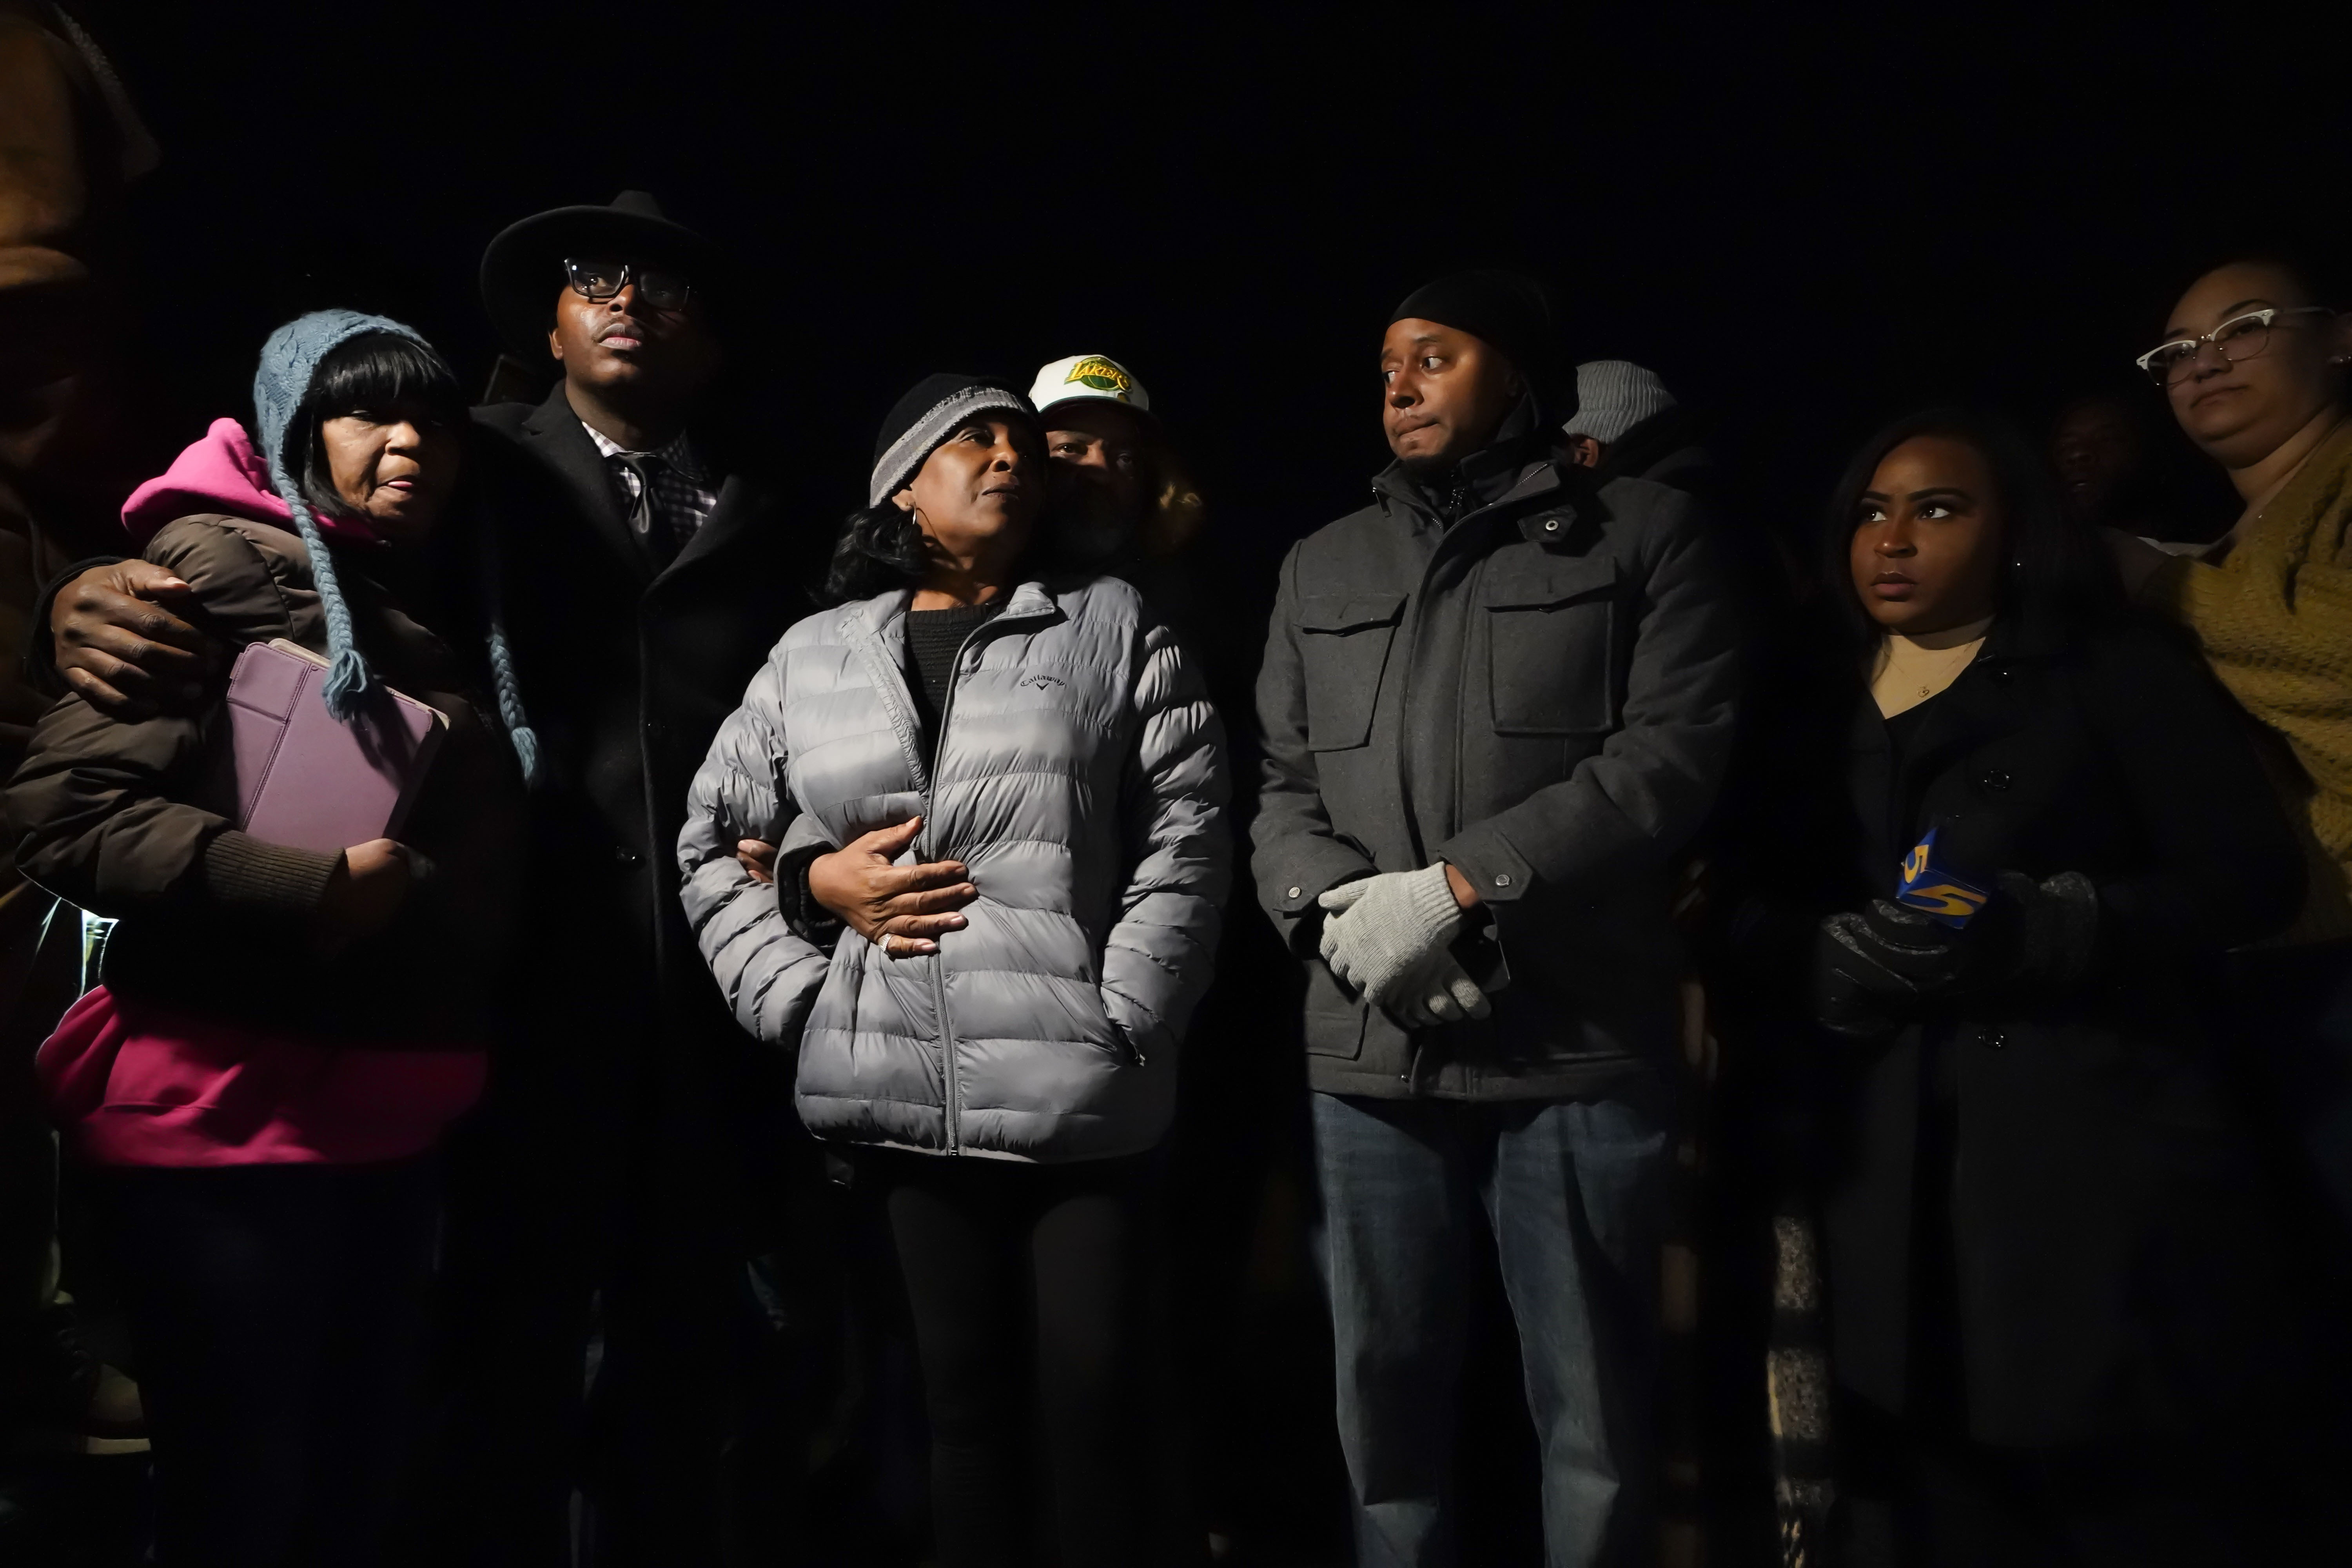 RowVaughn Wells, center, mother of Tyre Nichols, who died after being beaten by Memphis police officers, is comforted by his stepfather Rodney Wells, at the conclusion of a candlelight vigil for Tyre, in Memphis, Tenn., Thursday, Jan. 26, 2023 